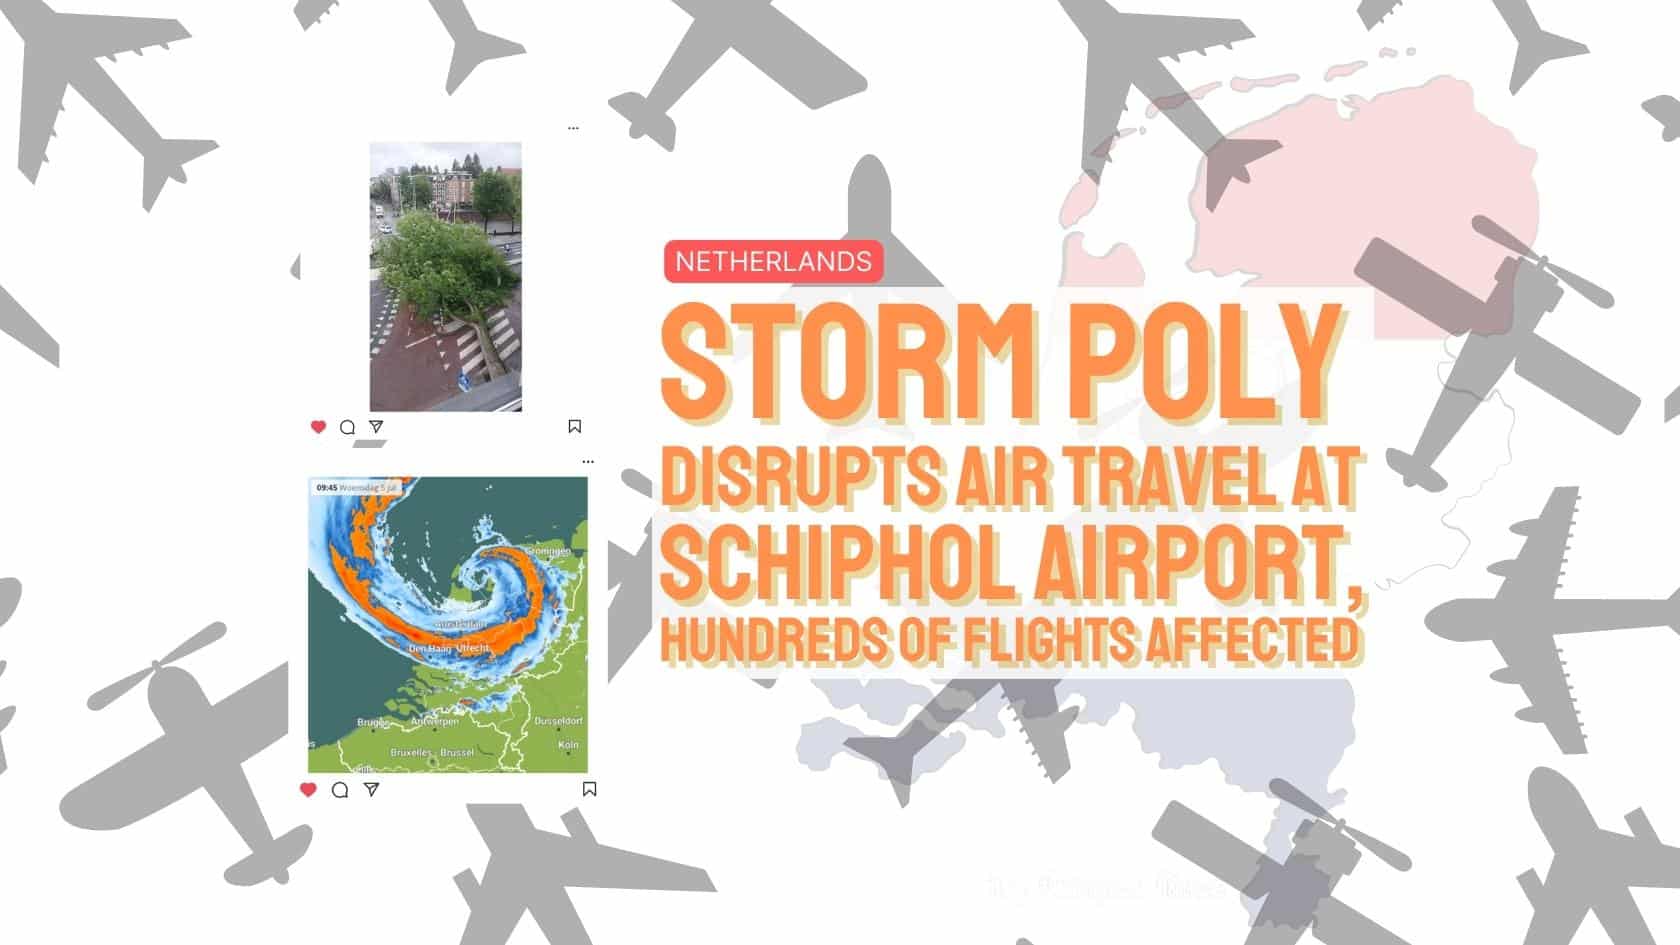 Netherlands, Storm Poly Disrupts Air Travel at Schiphol Airport, 100s of Flights Affected